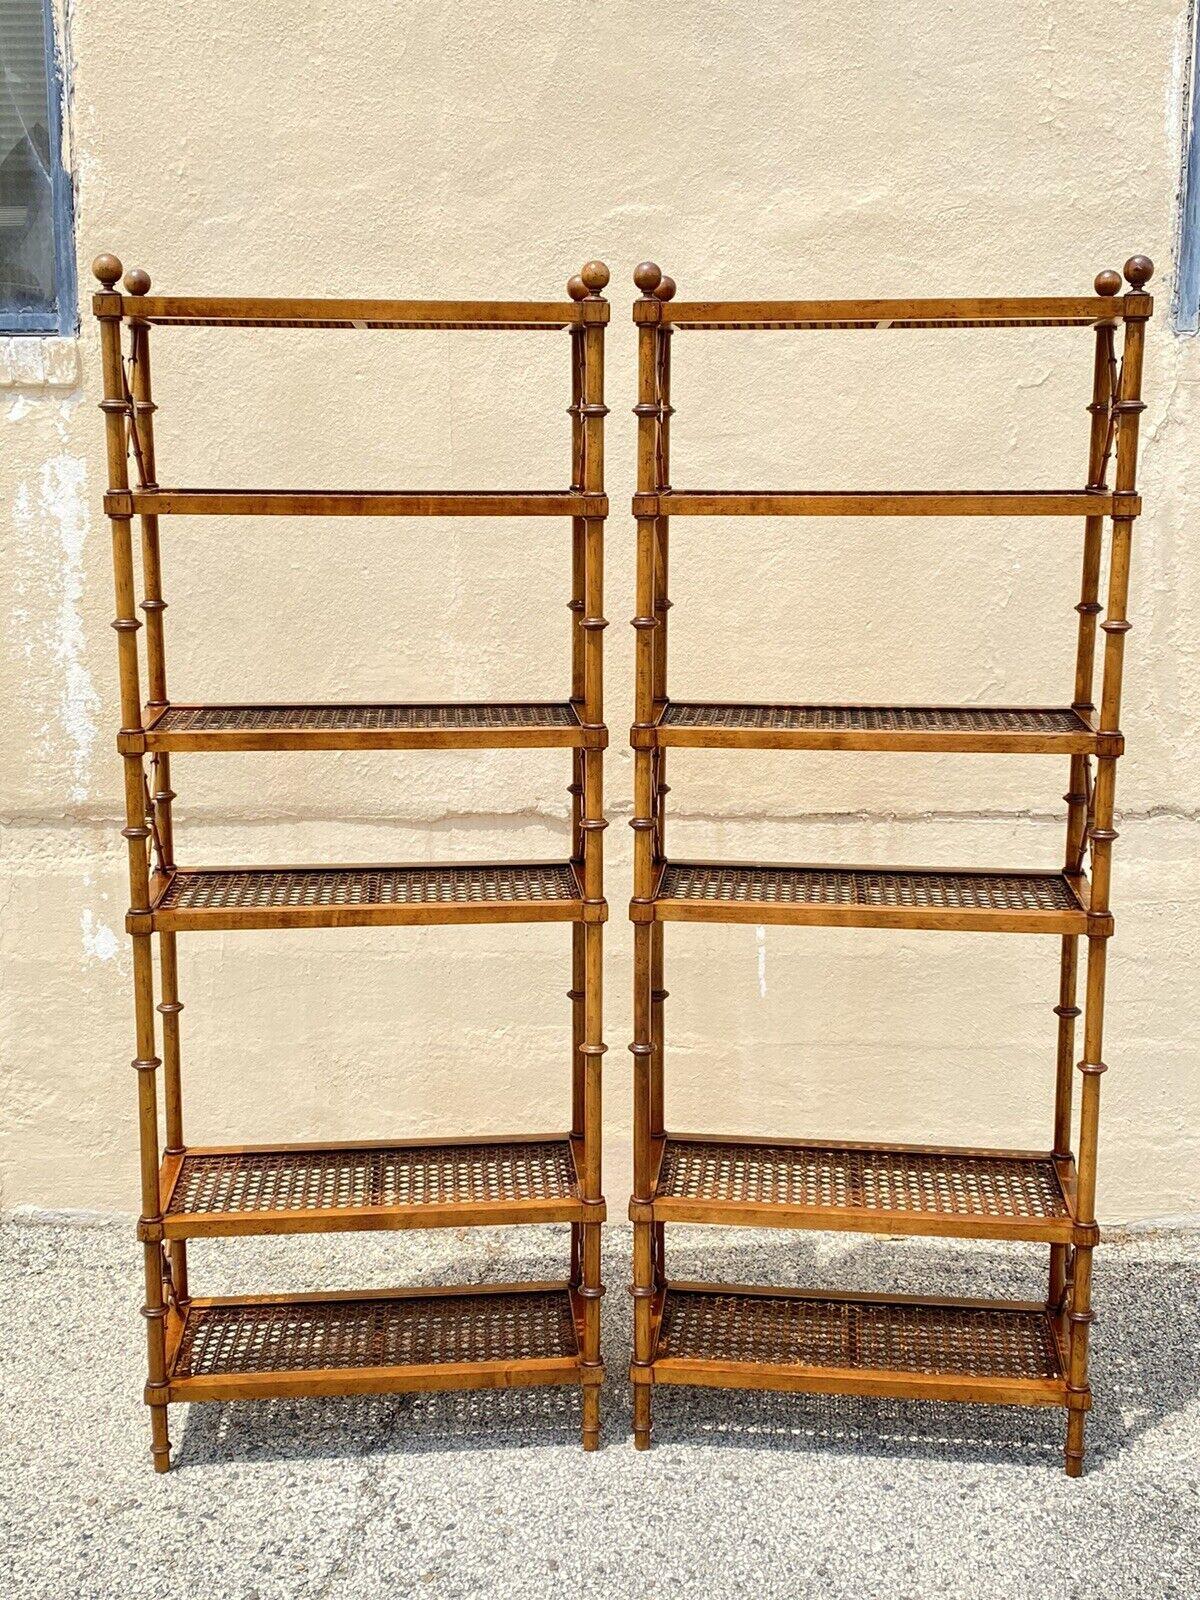 Vintage Hollywood Regency Faux Bamboo Wood & Cane 6 Tier Bookcase Etagere - Pair For Sale 5